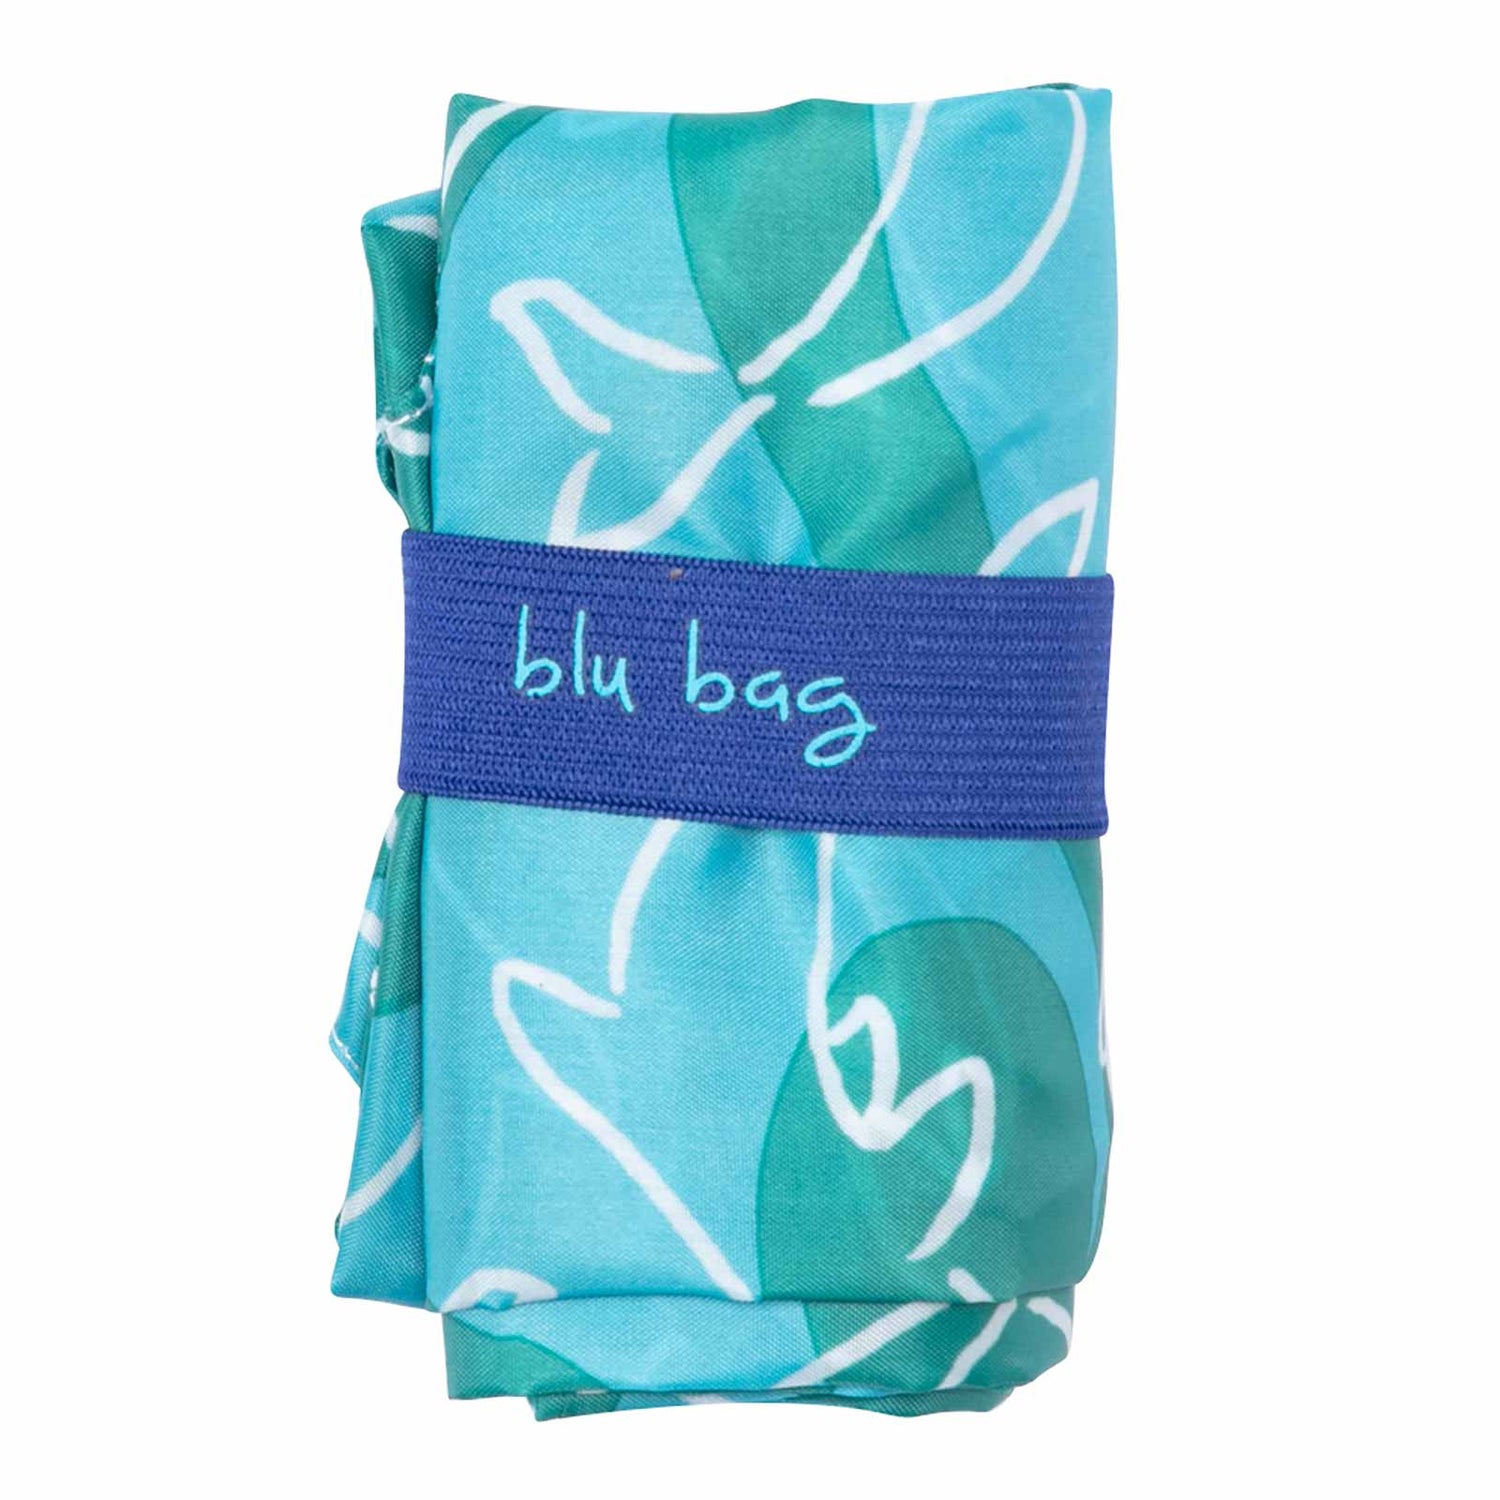 Dolphins Blu Bag: Your Sustainable Shopping Companion Reusable Shopping Bag - rockflowerpaper